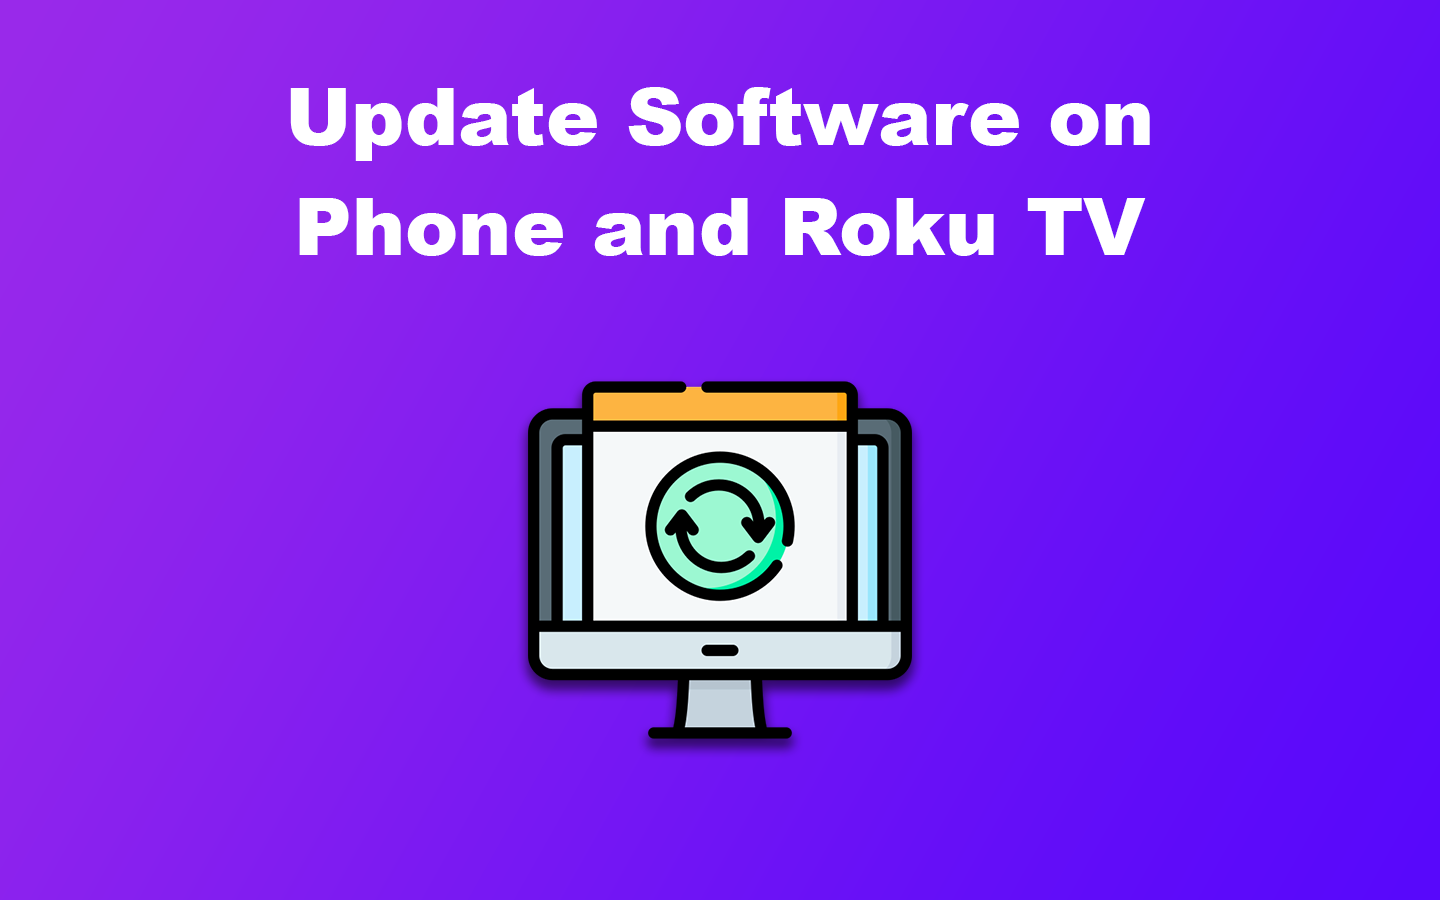 Update Software on Phone and Roku TV